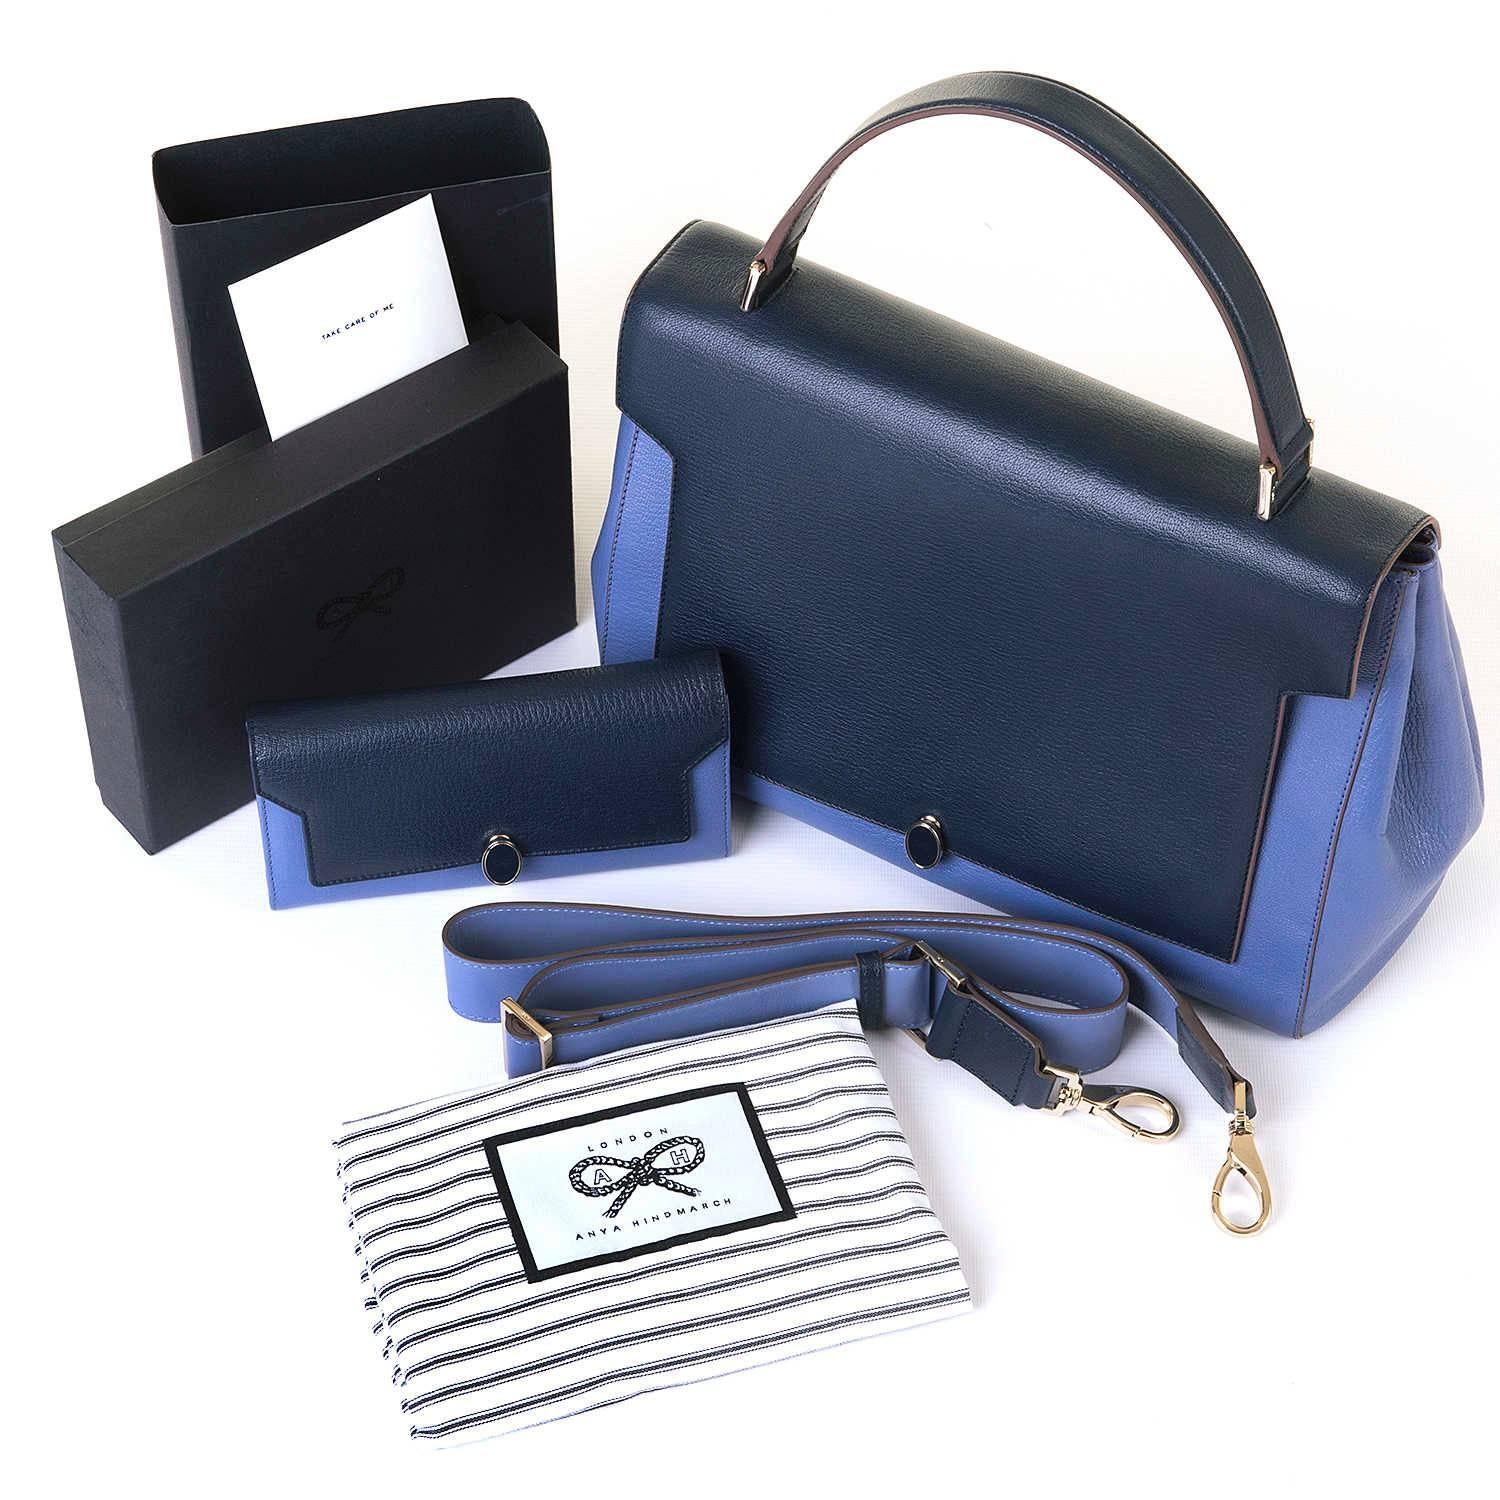 A fabulous, new & unused Anya Hindmarsh Bathurst GM Bag & matching Purse, in two-tone Navy & Lilac with silver palladium hardware. In store-fresh condition, the inside with all it's different labelled pockets and a full sized zipped pocket, is